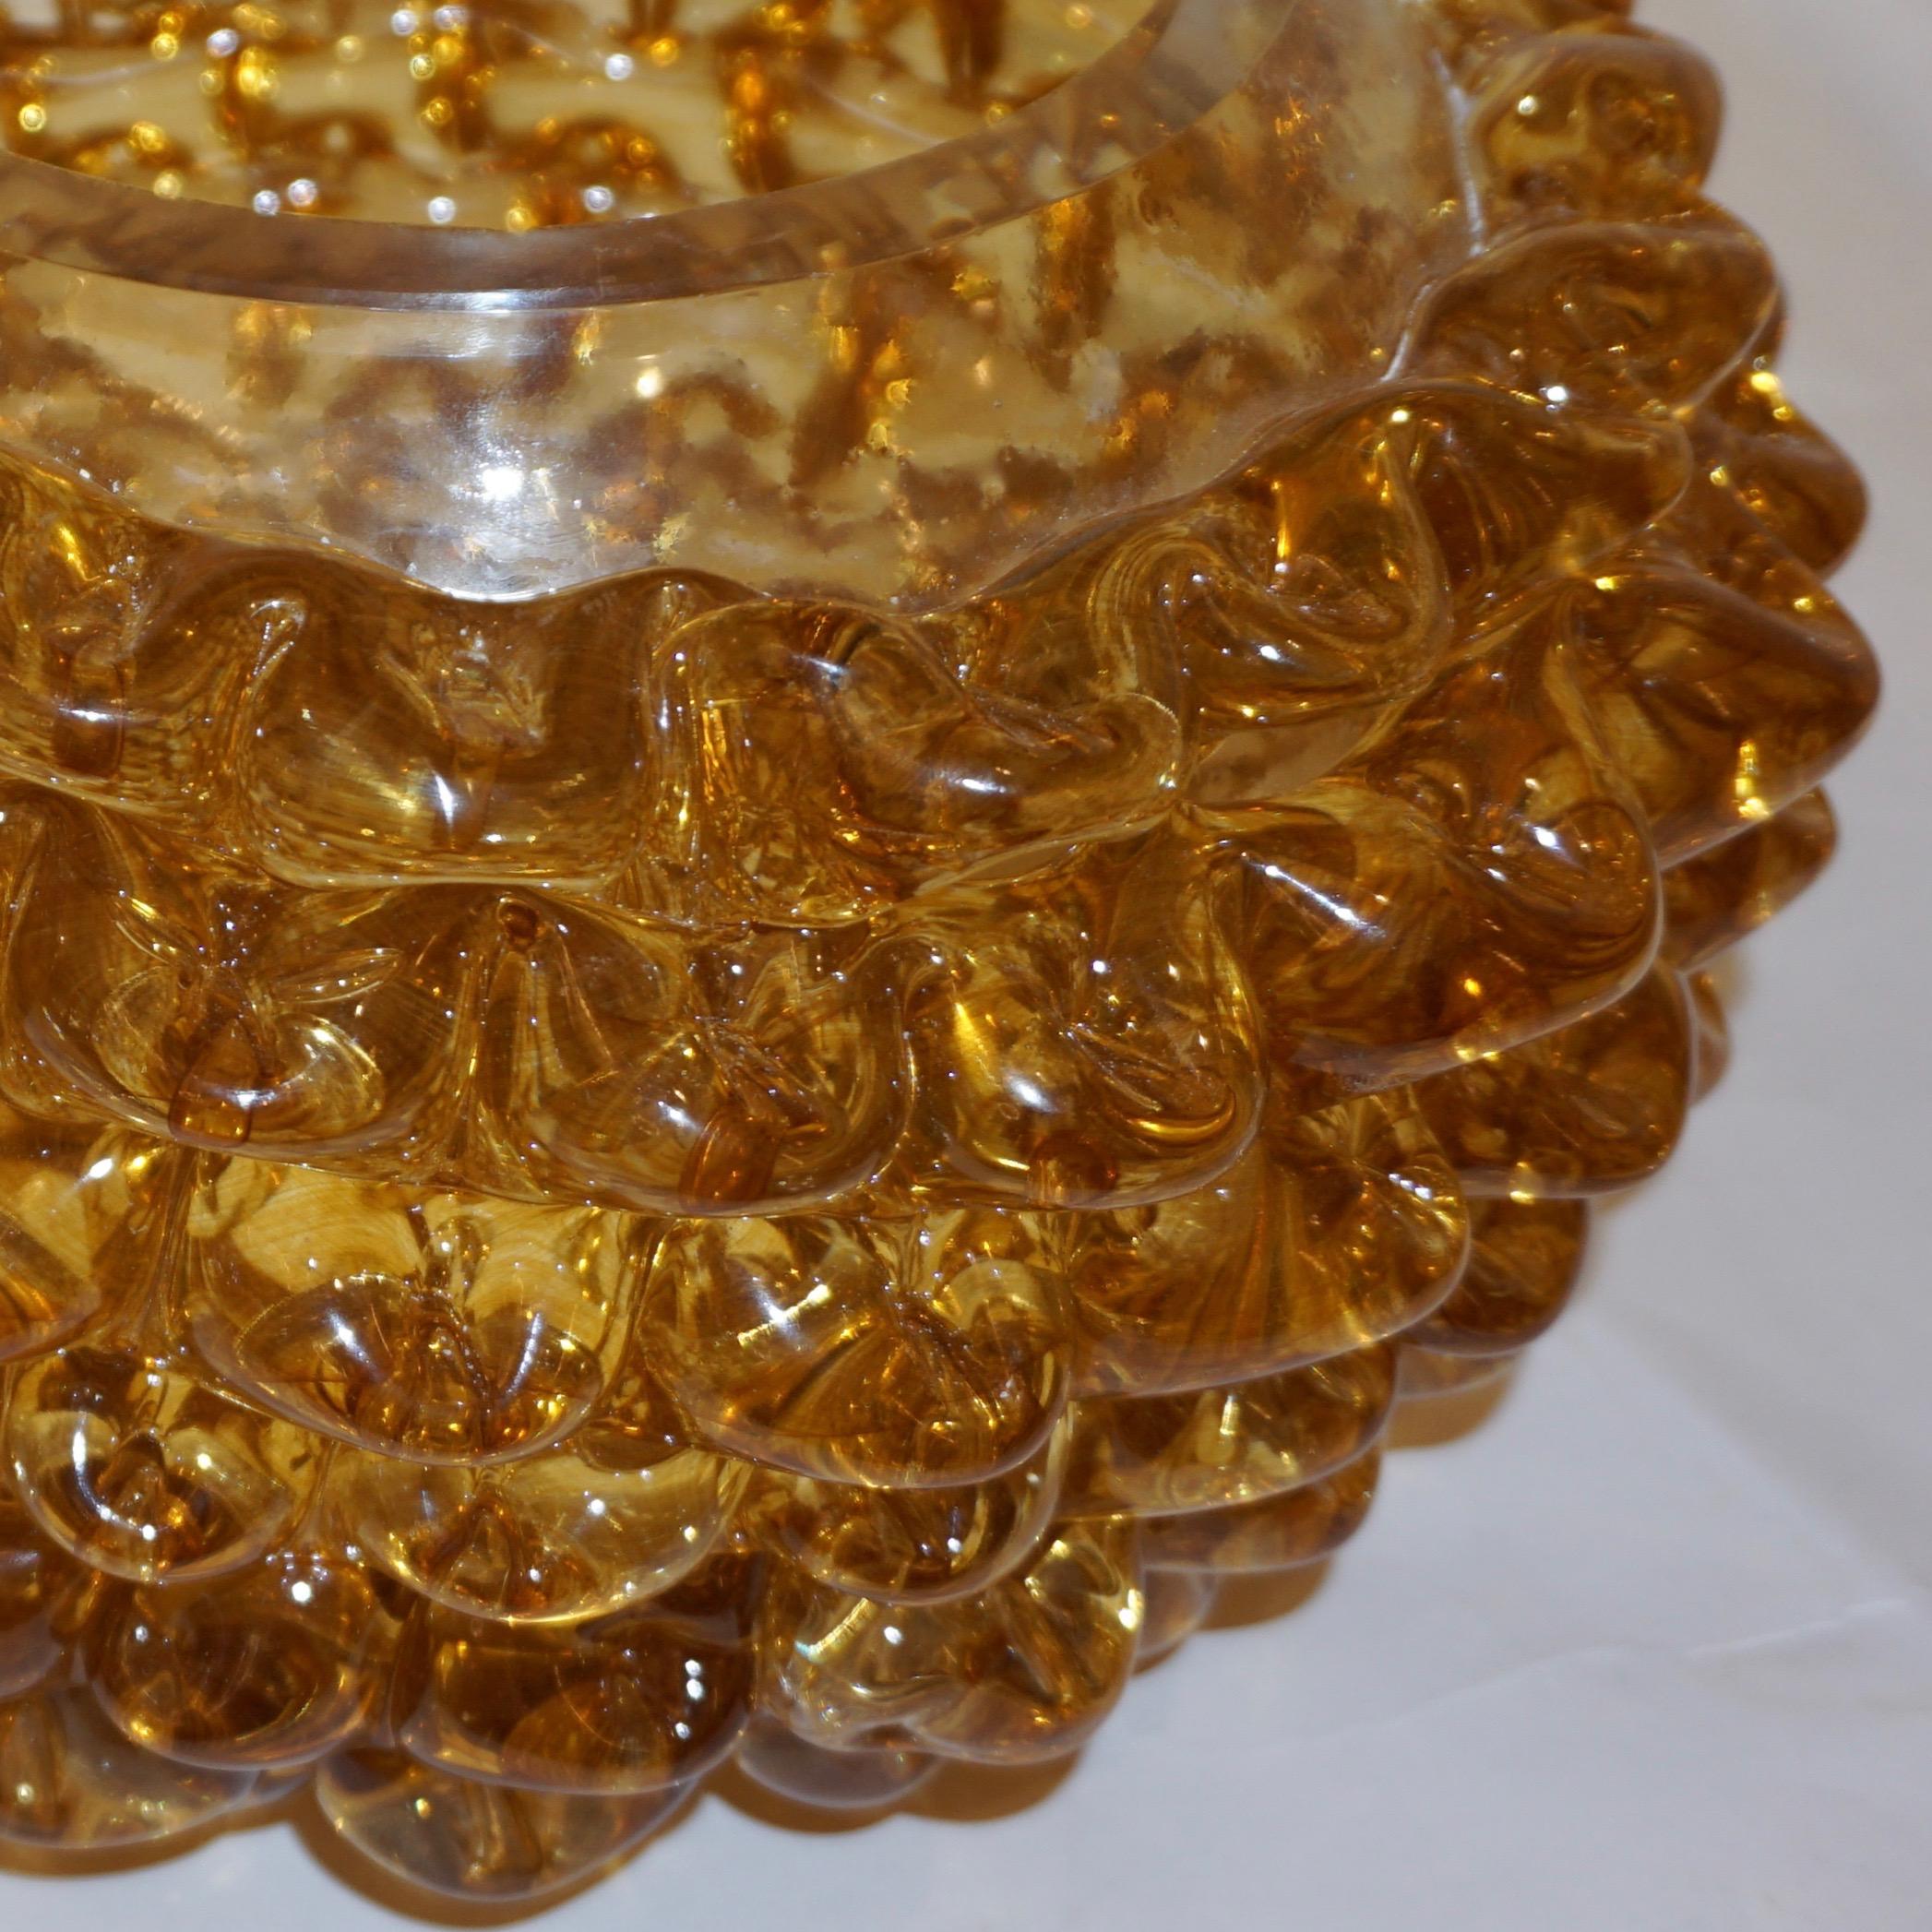 Exquisite mid-20th century vase or bowl by Barovier & Toso with Art Deco flair in rich blown whiskey gold Murano art glass, hand decorated with the technique Rostrato: spikes of glass individually hand pulled in relief. Rostrato is a distinctive